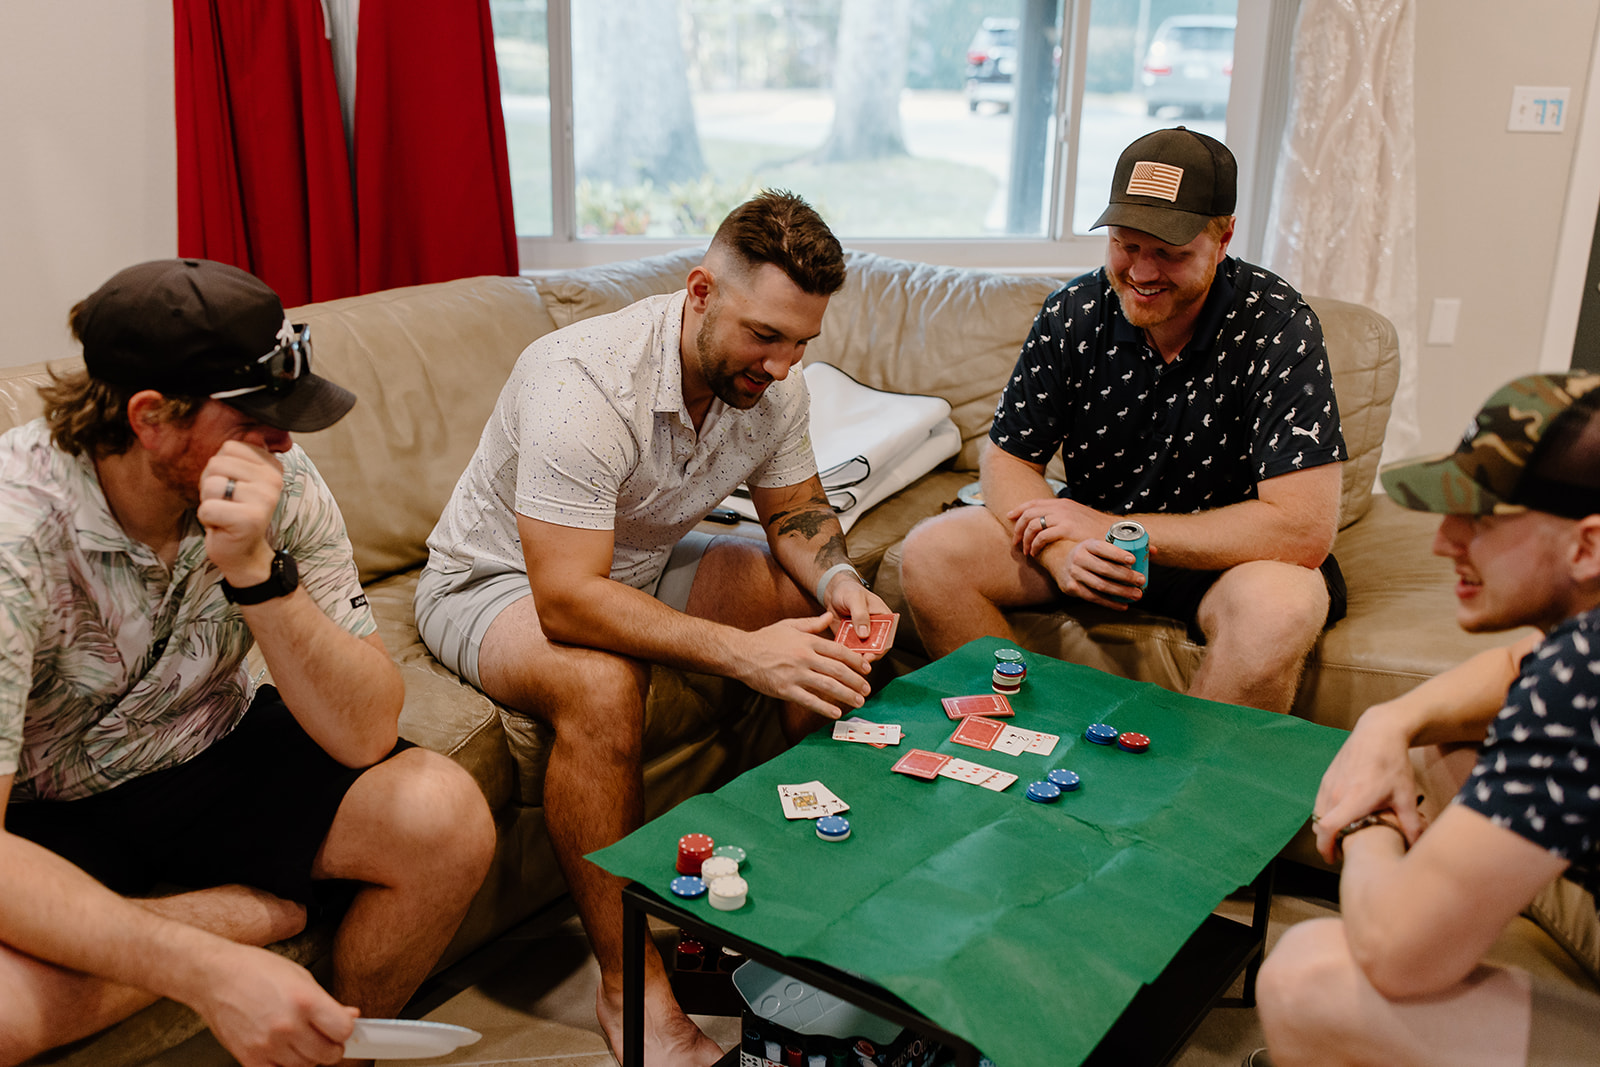 Men playing cards around a couch 